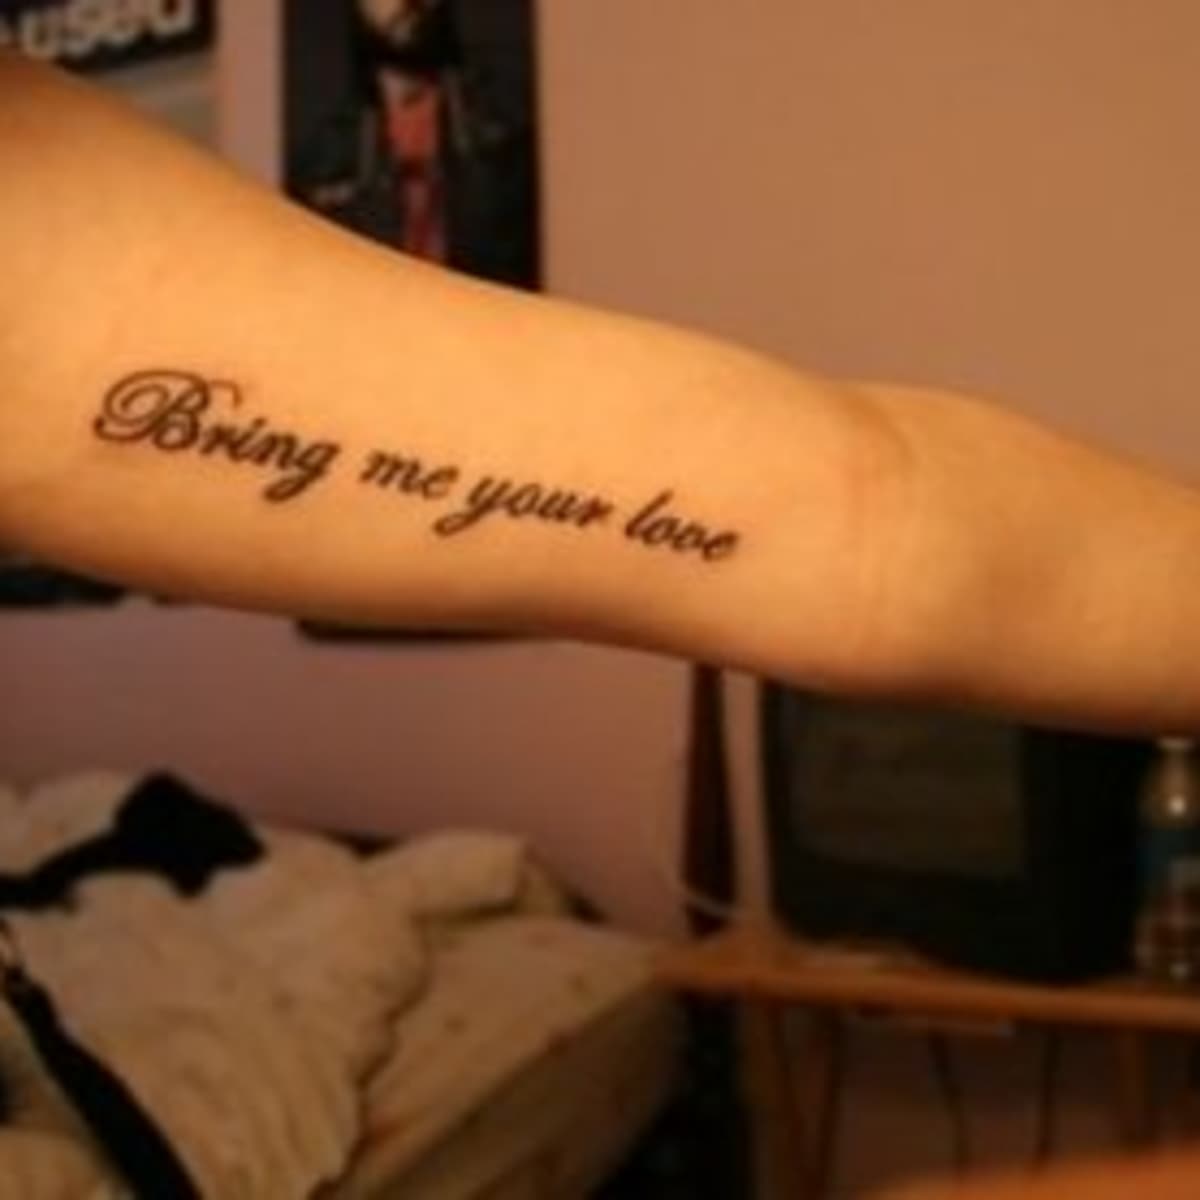 Tattoo tagged with: bob marley and the wailers, winston churchill quotes,  bob marley lyrics, quotes by authors, facebook, music band, typewriter  font, if you are going through hell keep going, twitter, lyric,